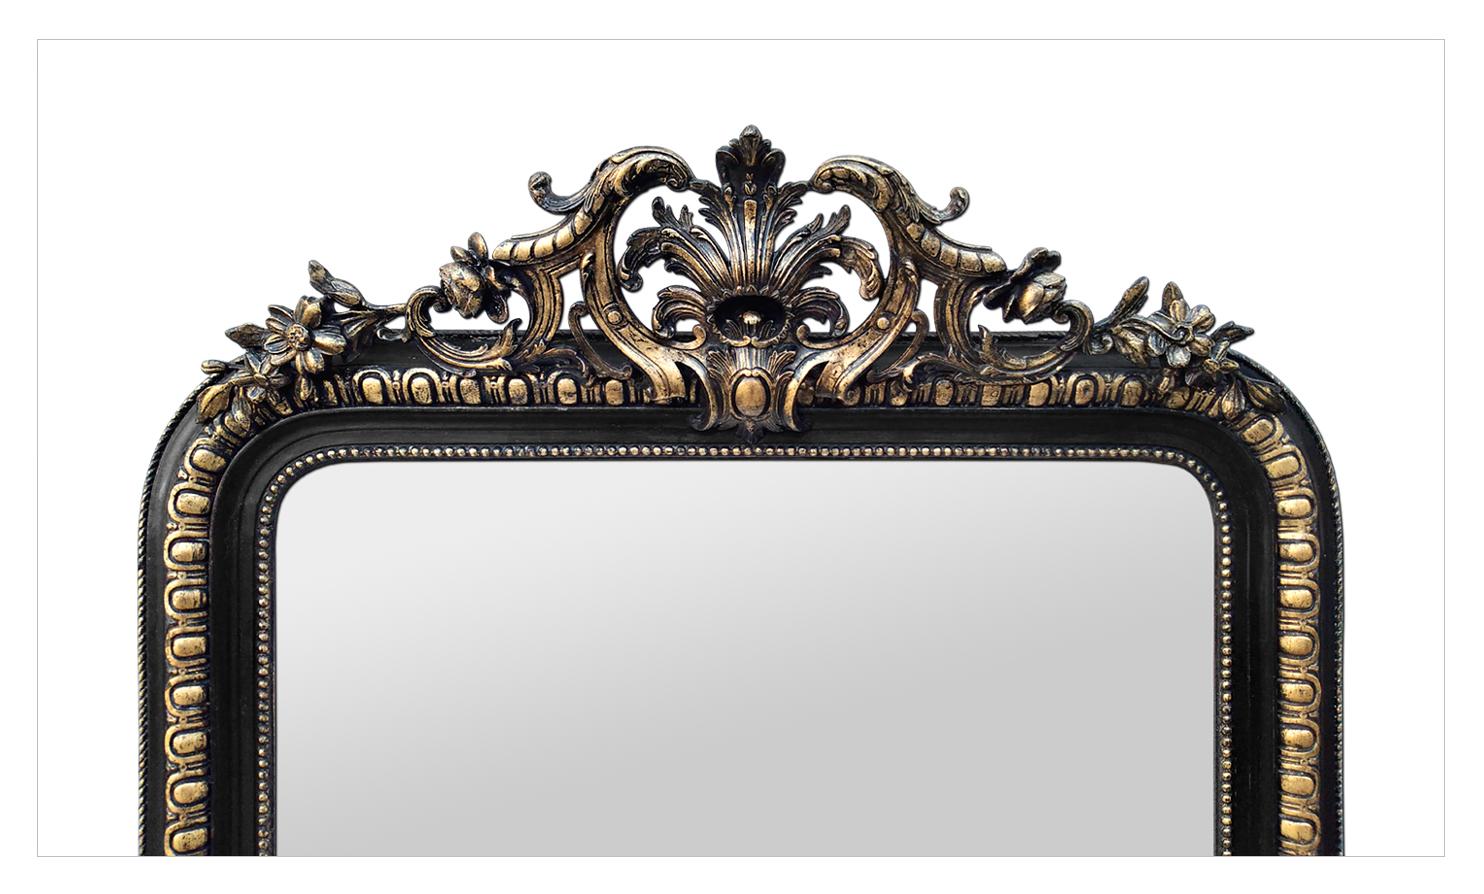 Large antique wall mirror with pediment, Napoleon III period, circa 1870. Antique pediment mirror, black and gilded, decor of stylized flowers and foliages, gadroons and pearls gilded on the frame. Re-gilding to the leaf patinated. Antique frame